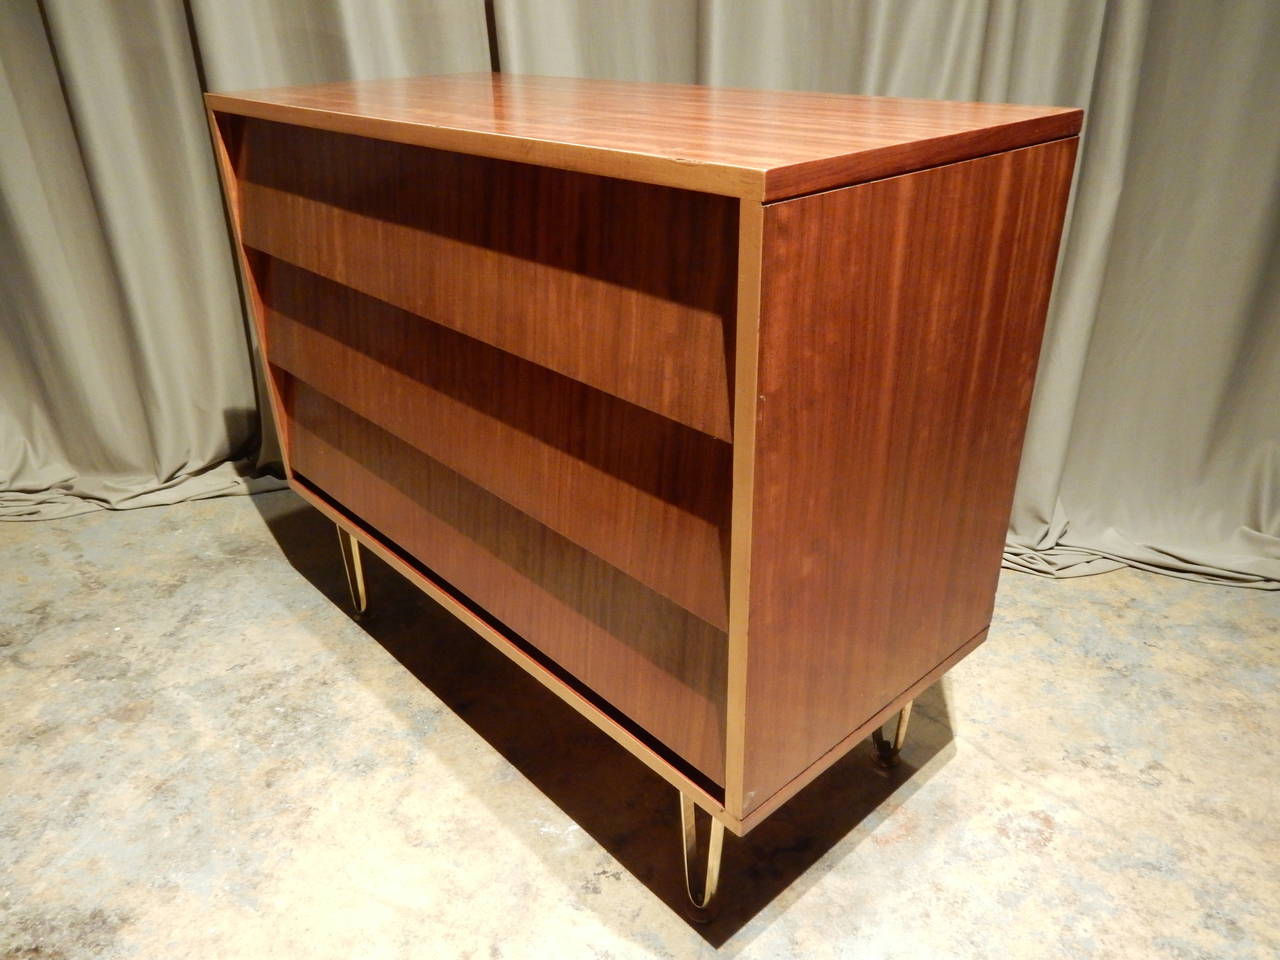 French Mid-Century Modern three-drawer louvered front commode on brass legs. Very nice warm color with contrasting band around front.